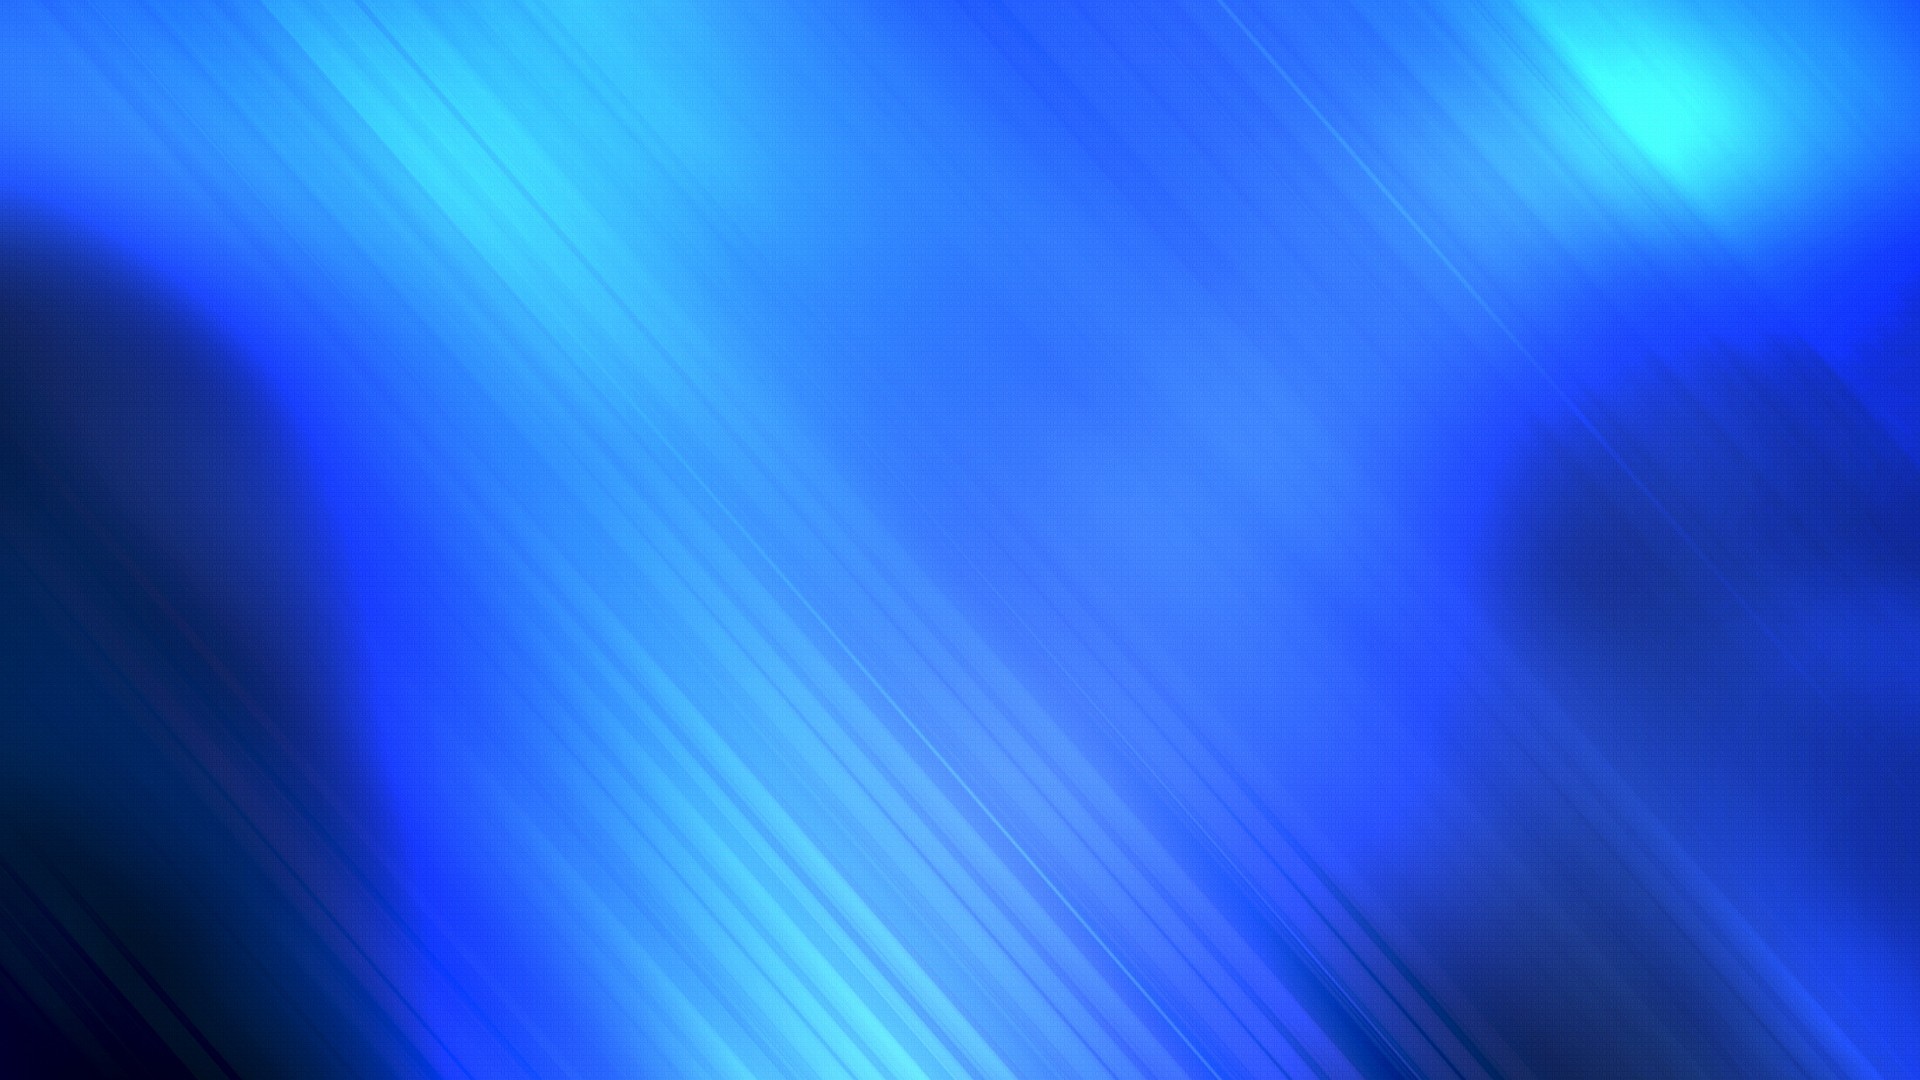 Download px HD Blue HD Wallpapers for Free | AHDzBooK